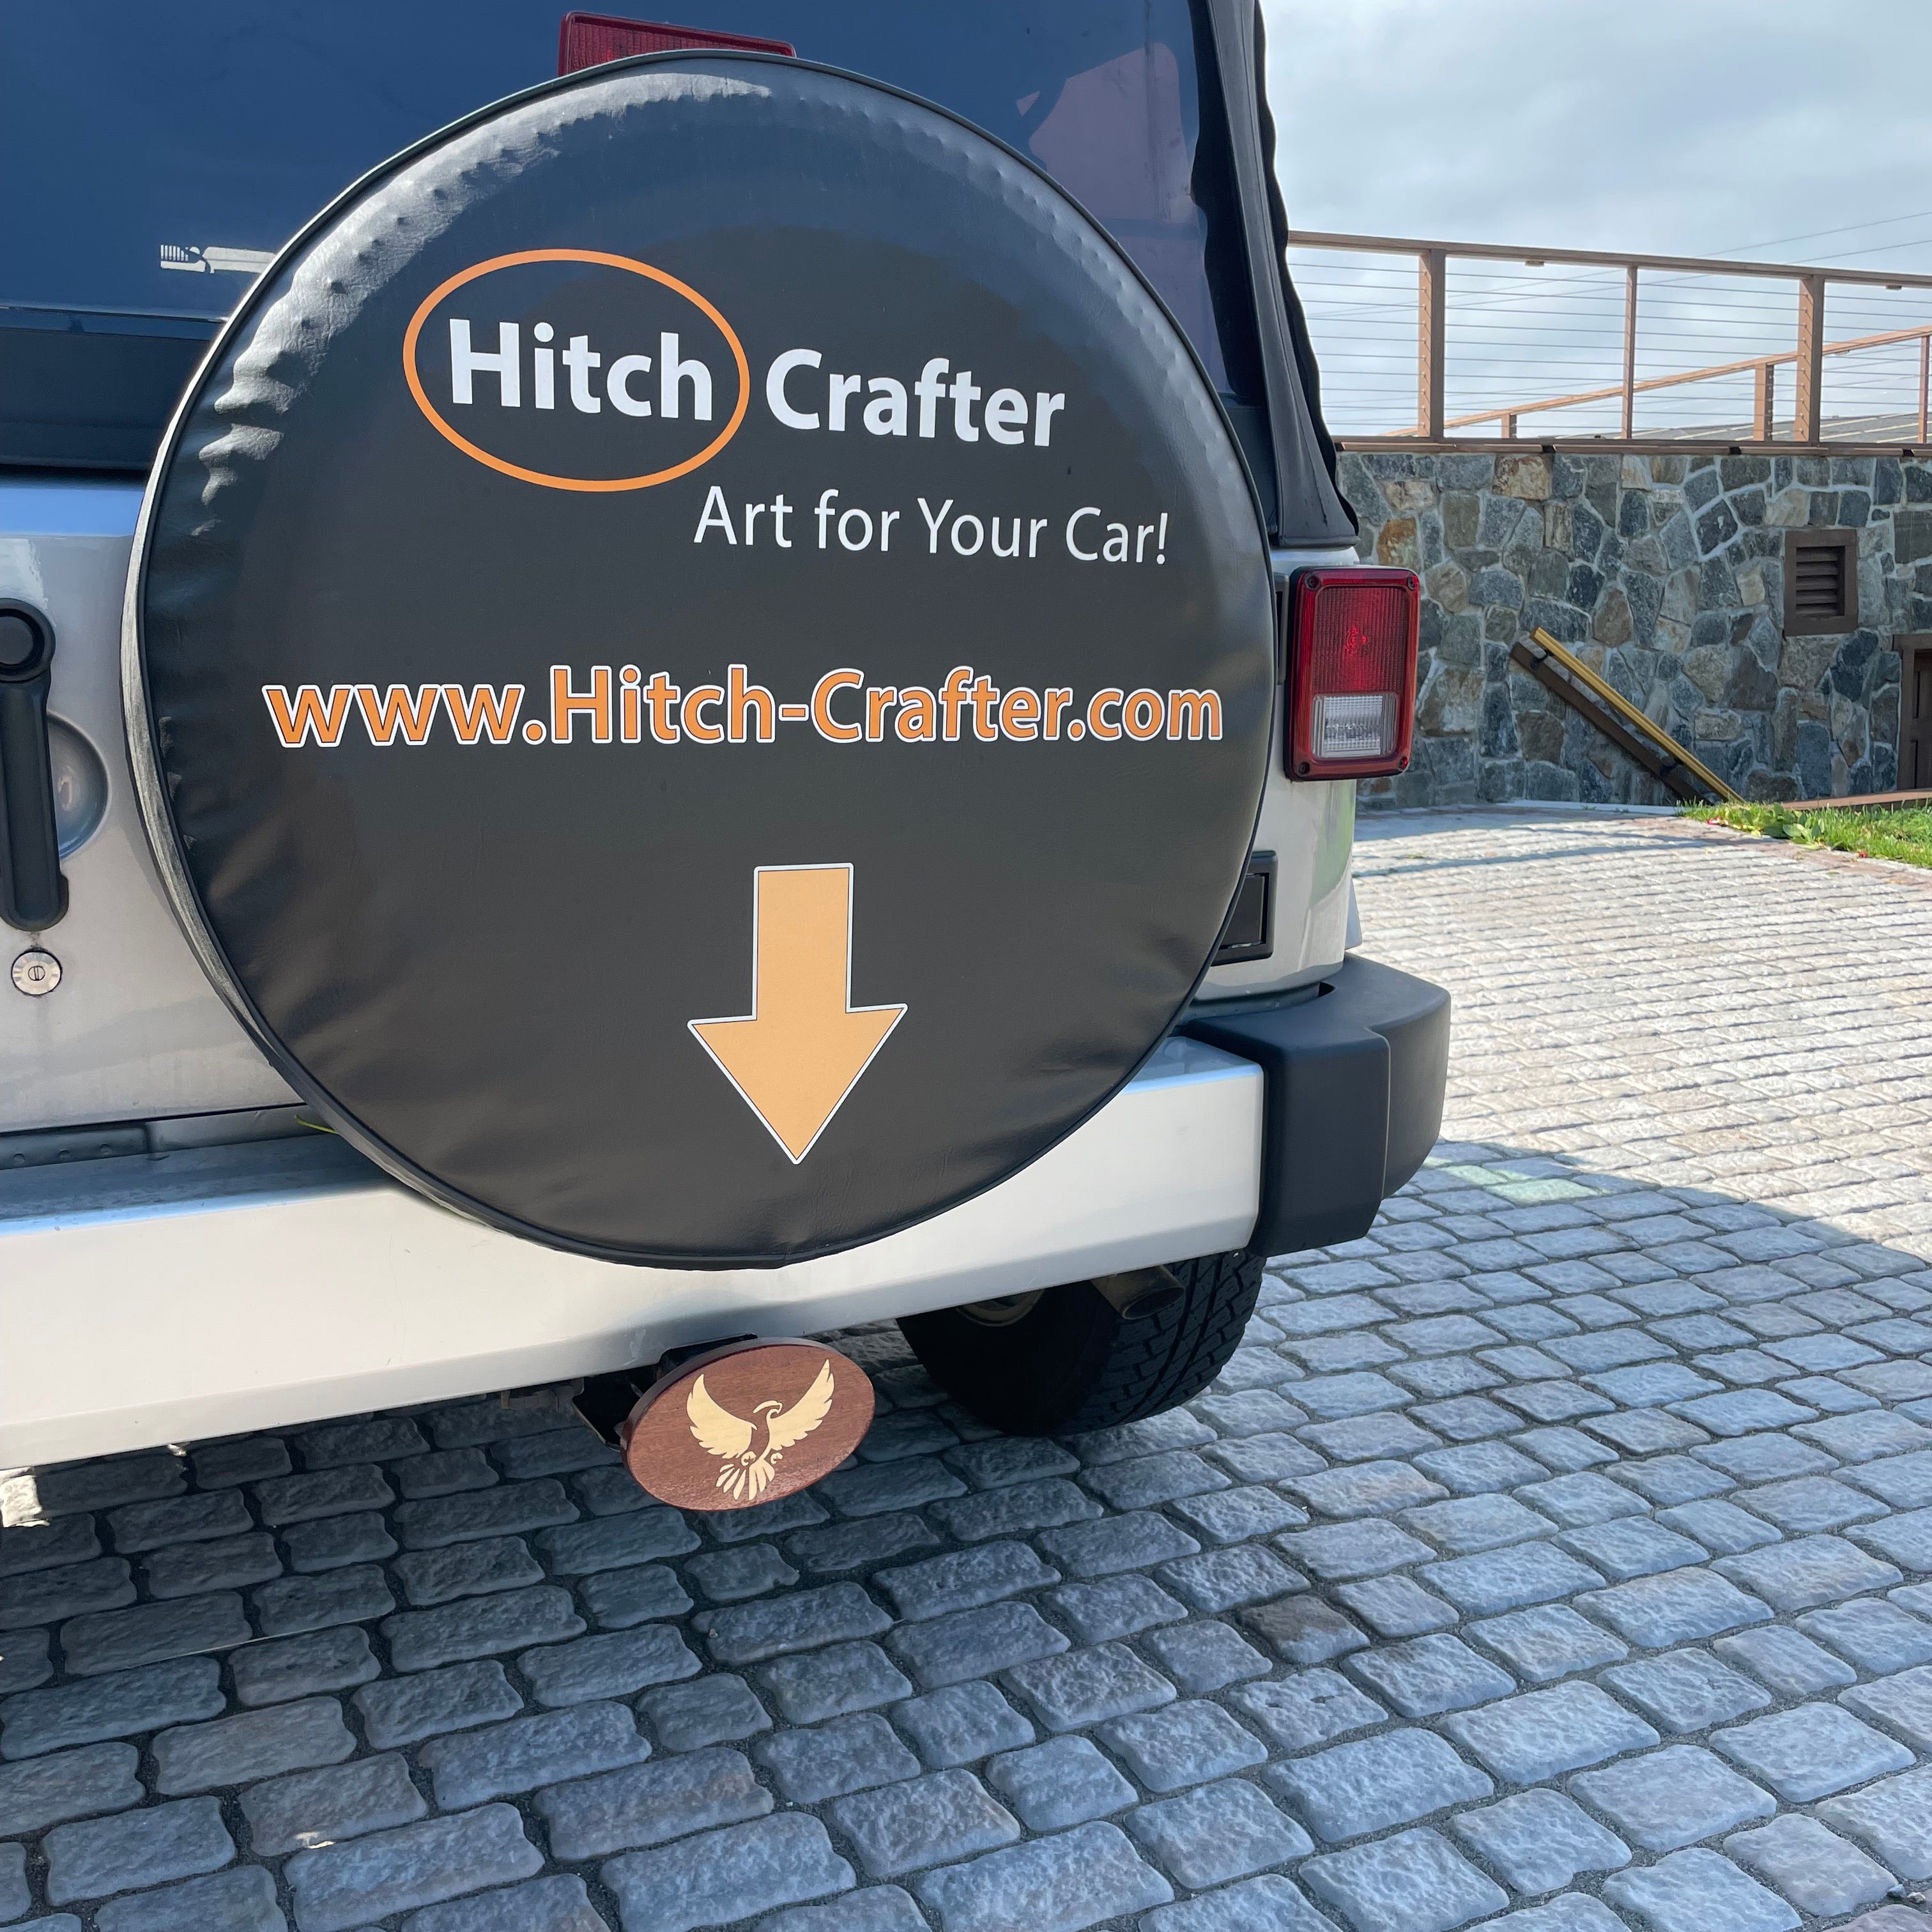 The Hitch-Crafter Collection